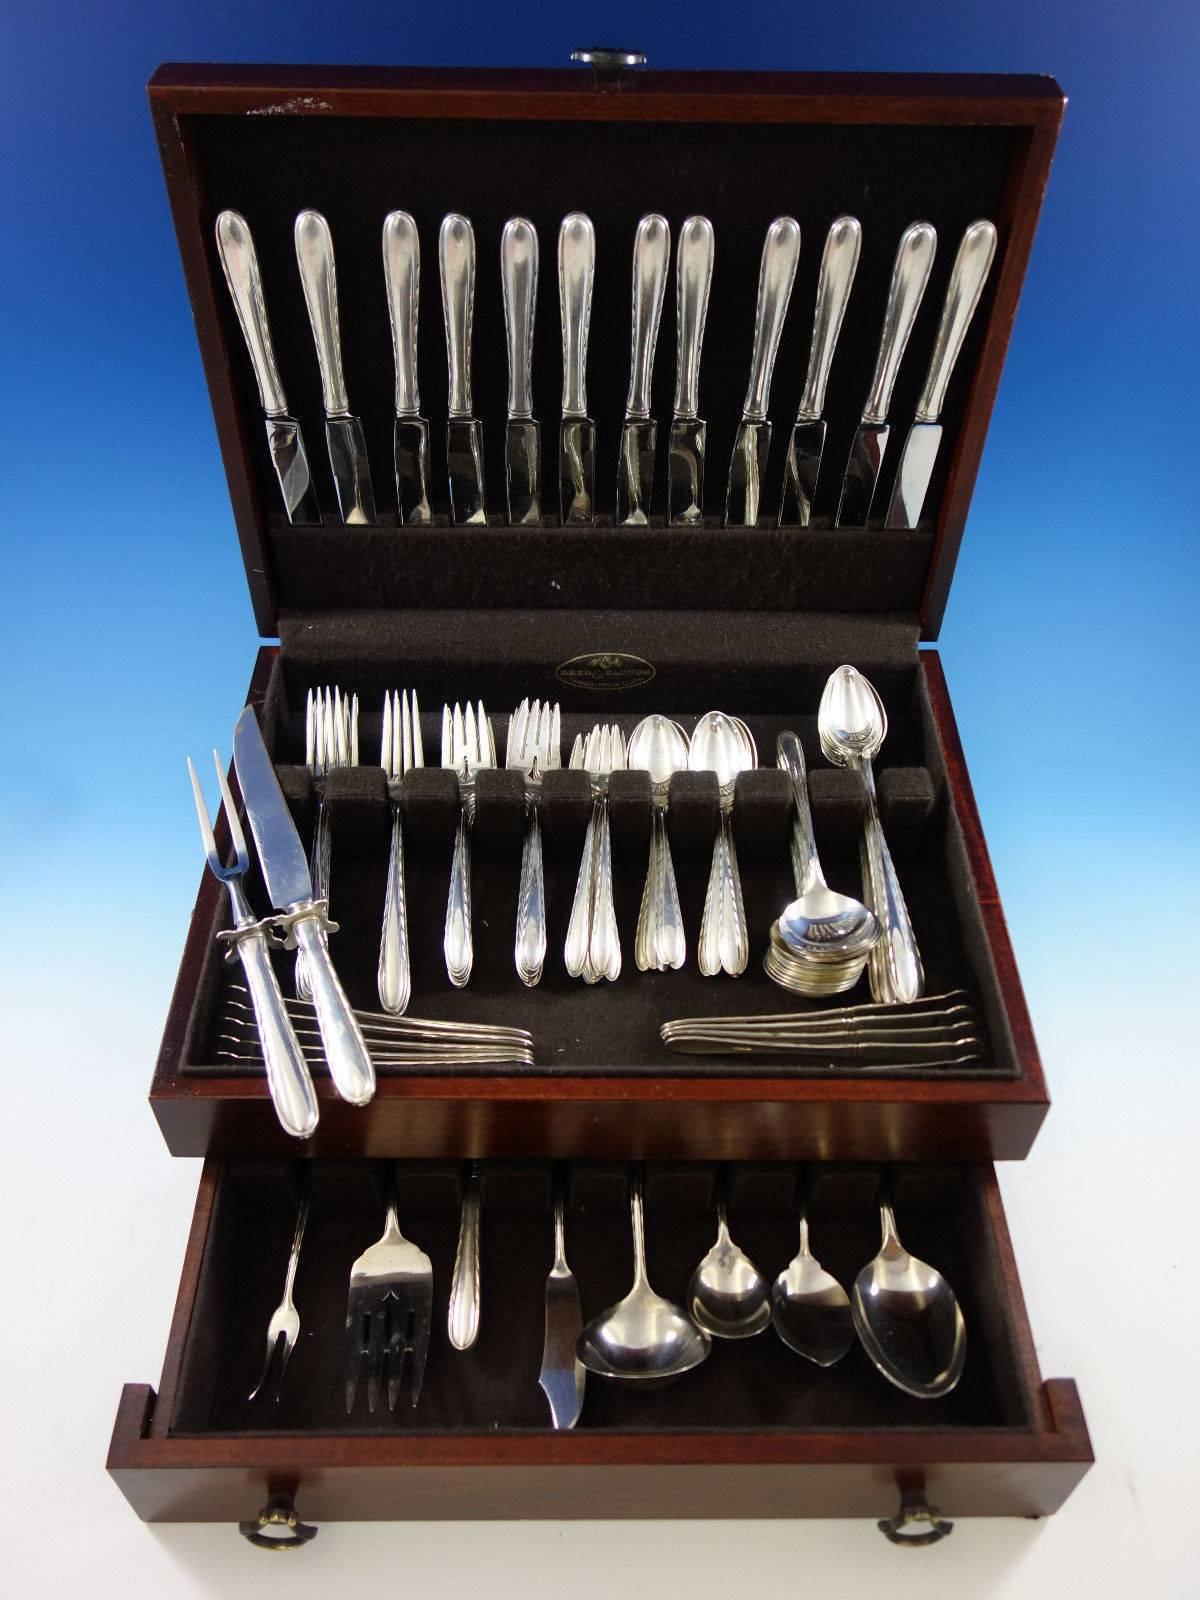 Silver flutes by Towle sterling silver flatware set - 107 pieces. This set includes: 

12 knives, 9